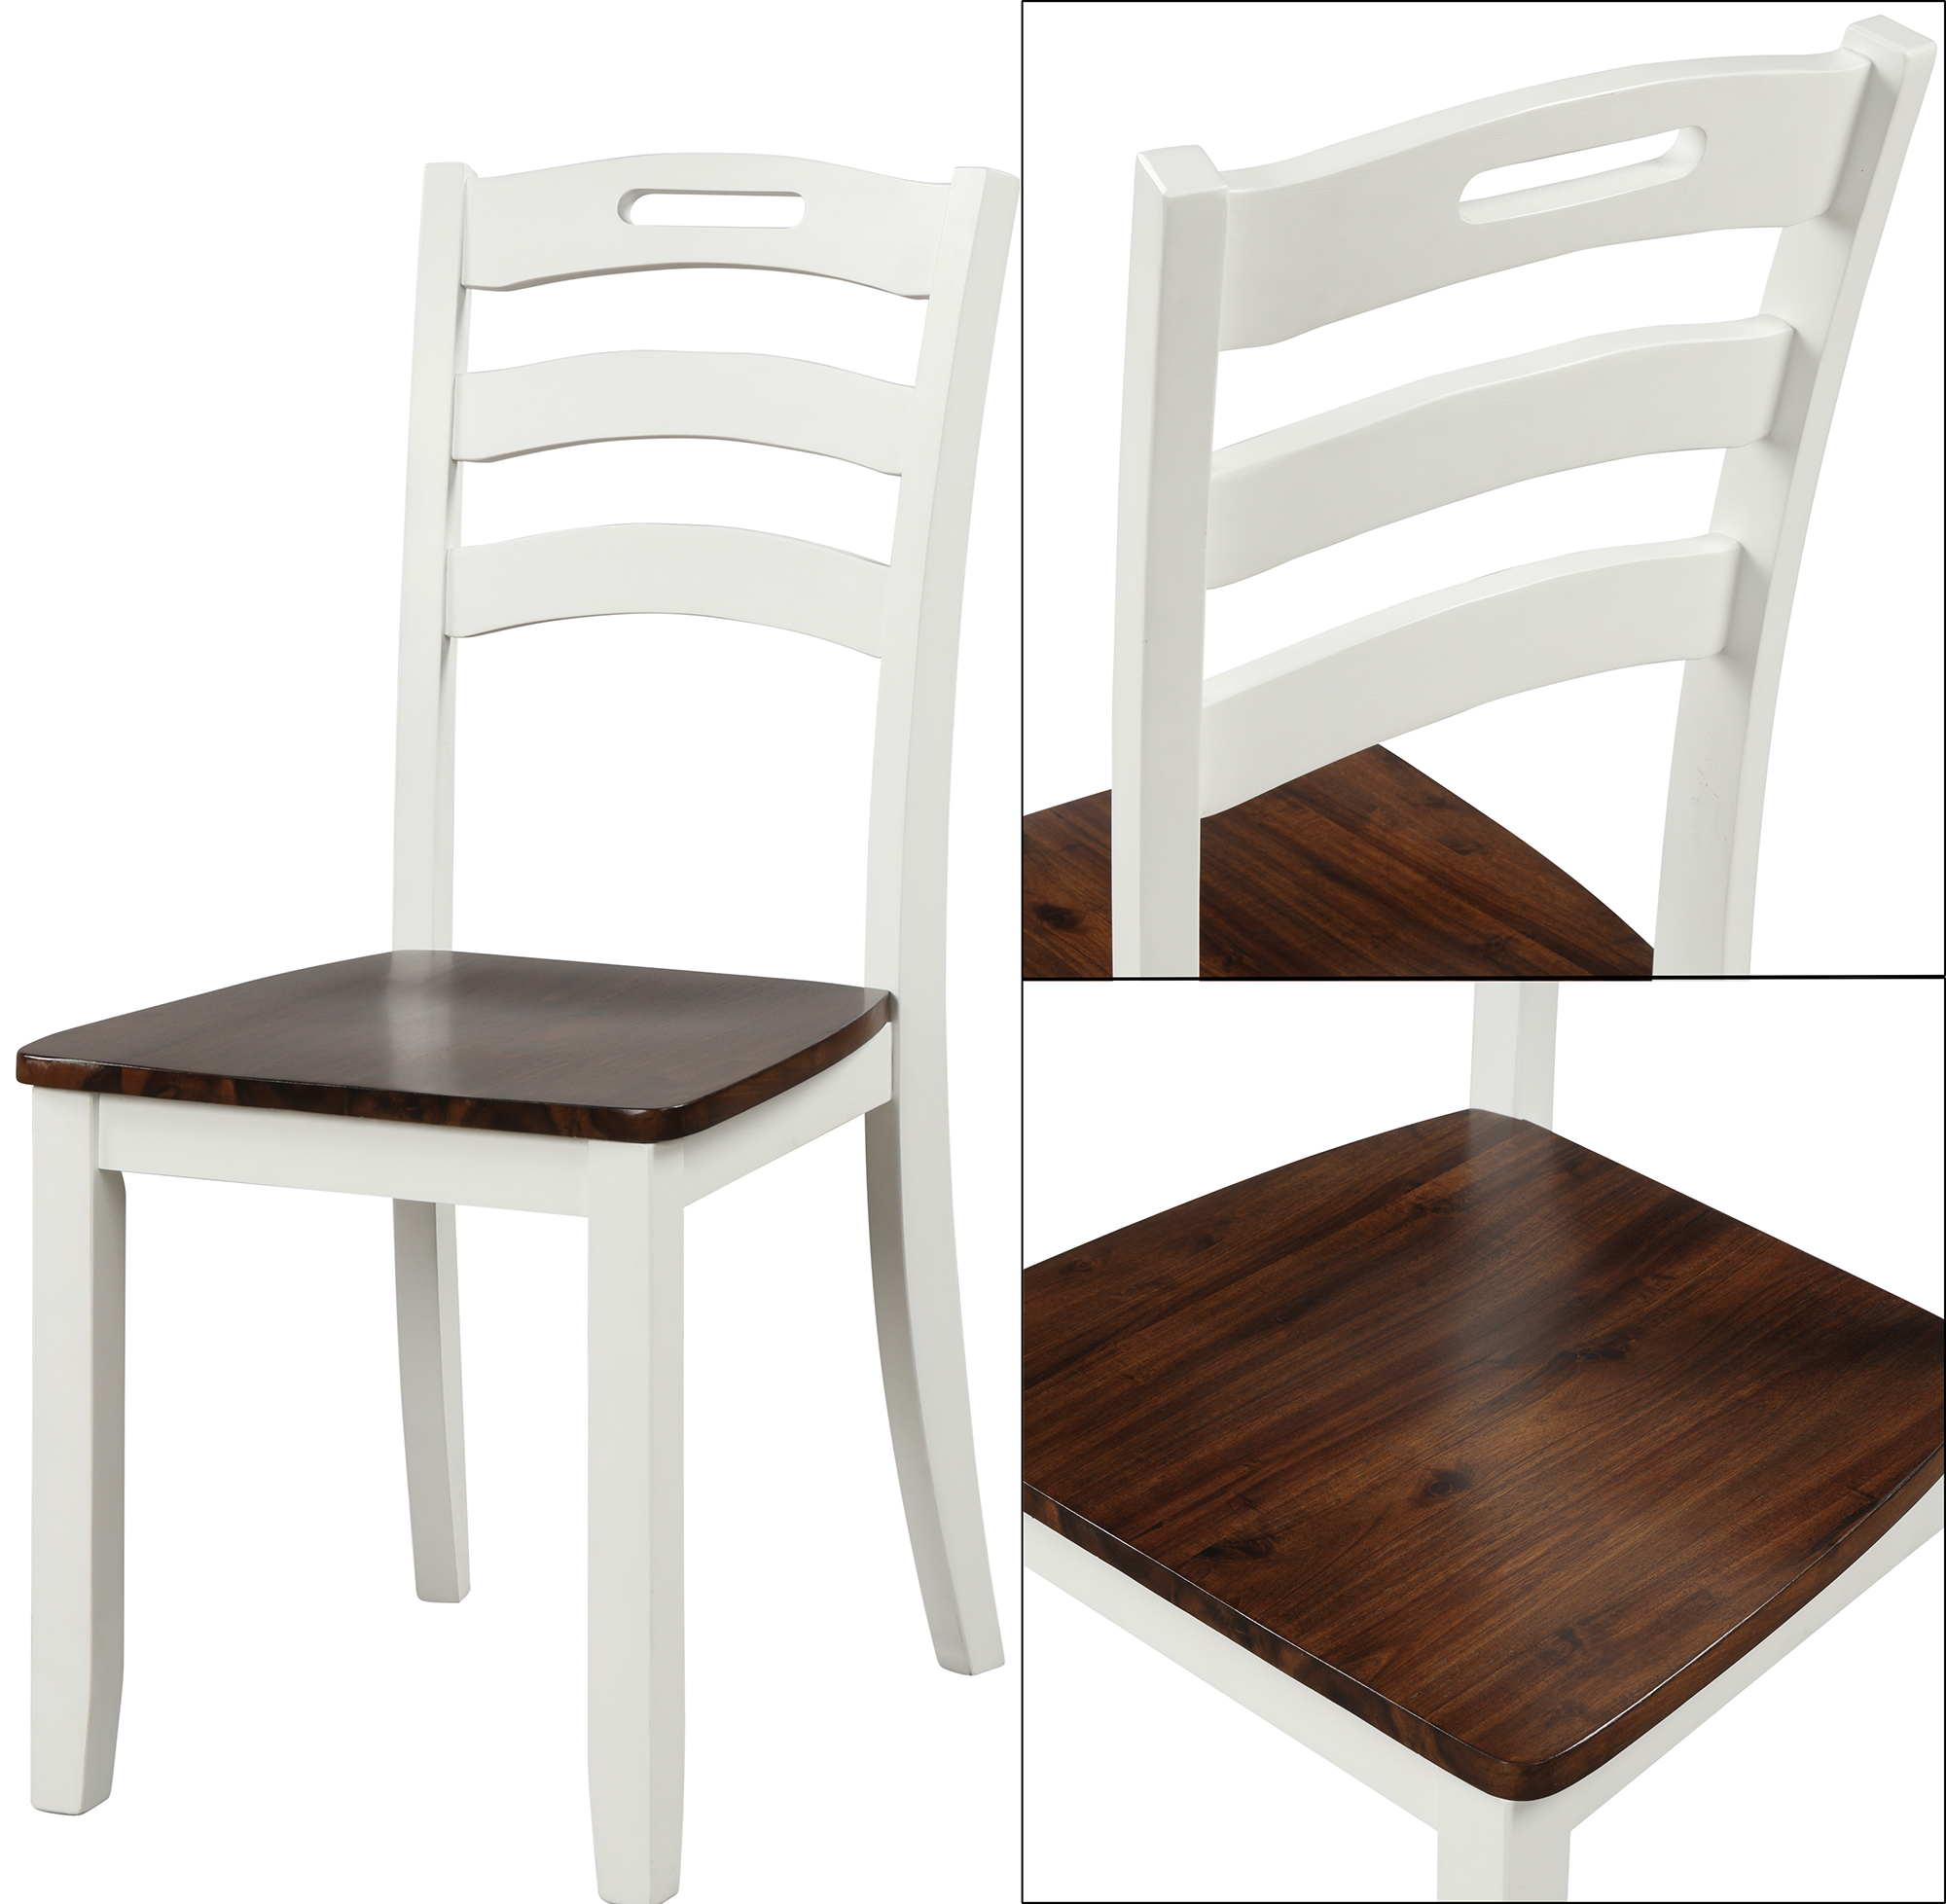 6 Piece Dining Table Set With Bench, Table Set